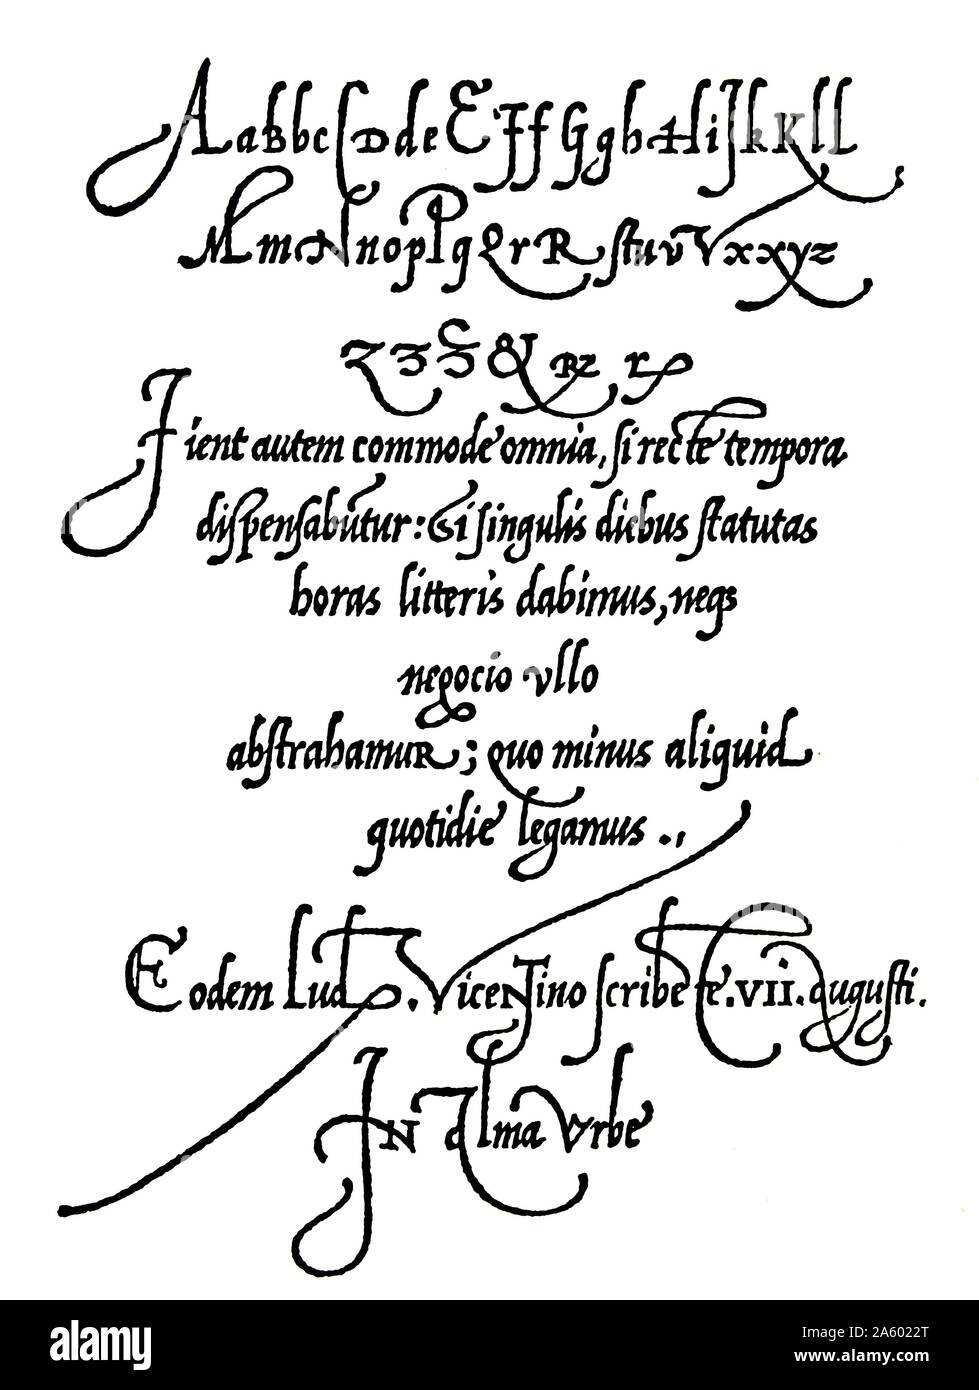 Page from Arrighi's Operina writing manual of 1539 showing handwriting styles of 16th century, early renaissance. Stock Photo